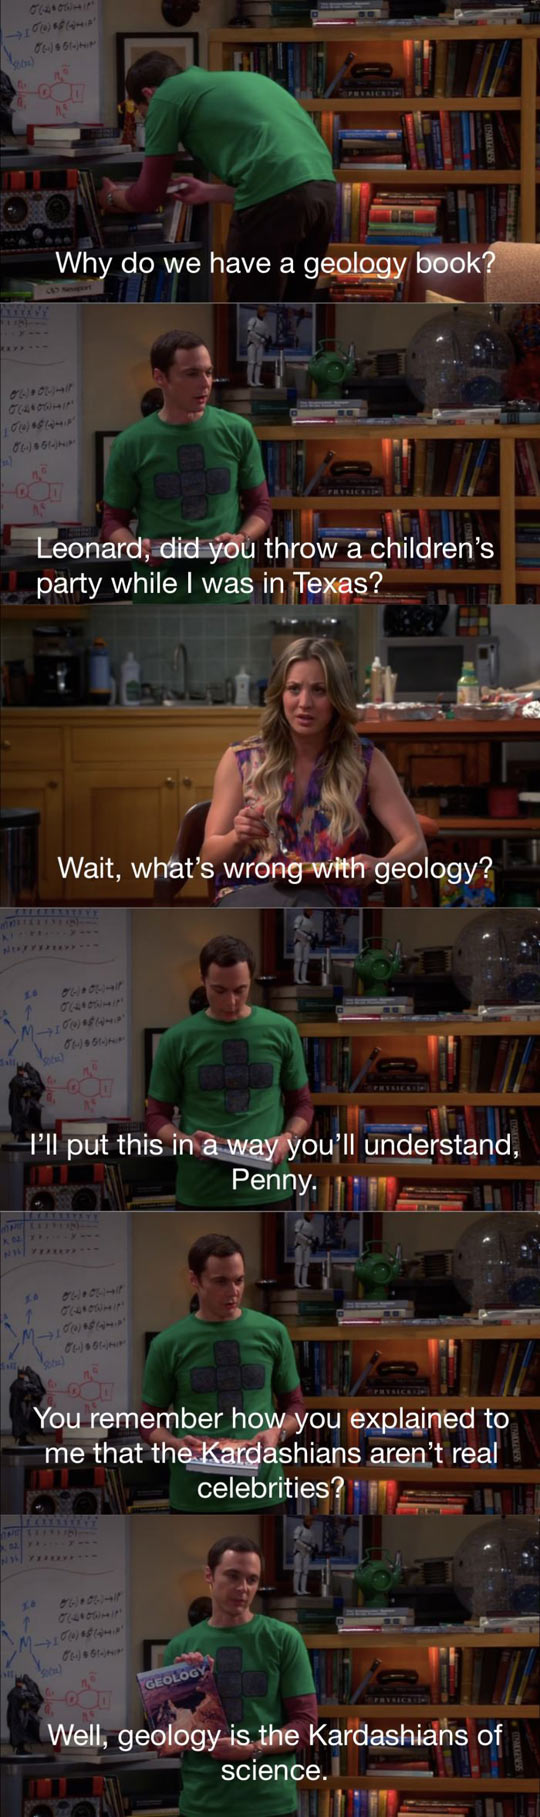 funny-picture-Big-Bang-Theory-Sheldon-Penny-geology